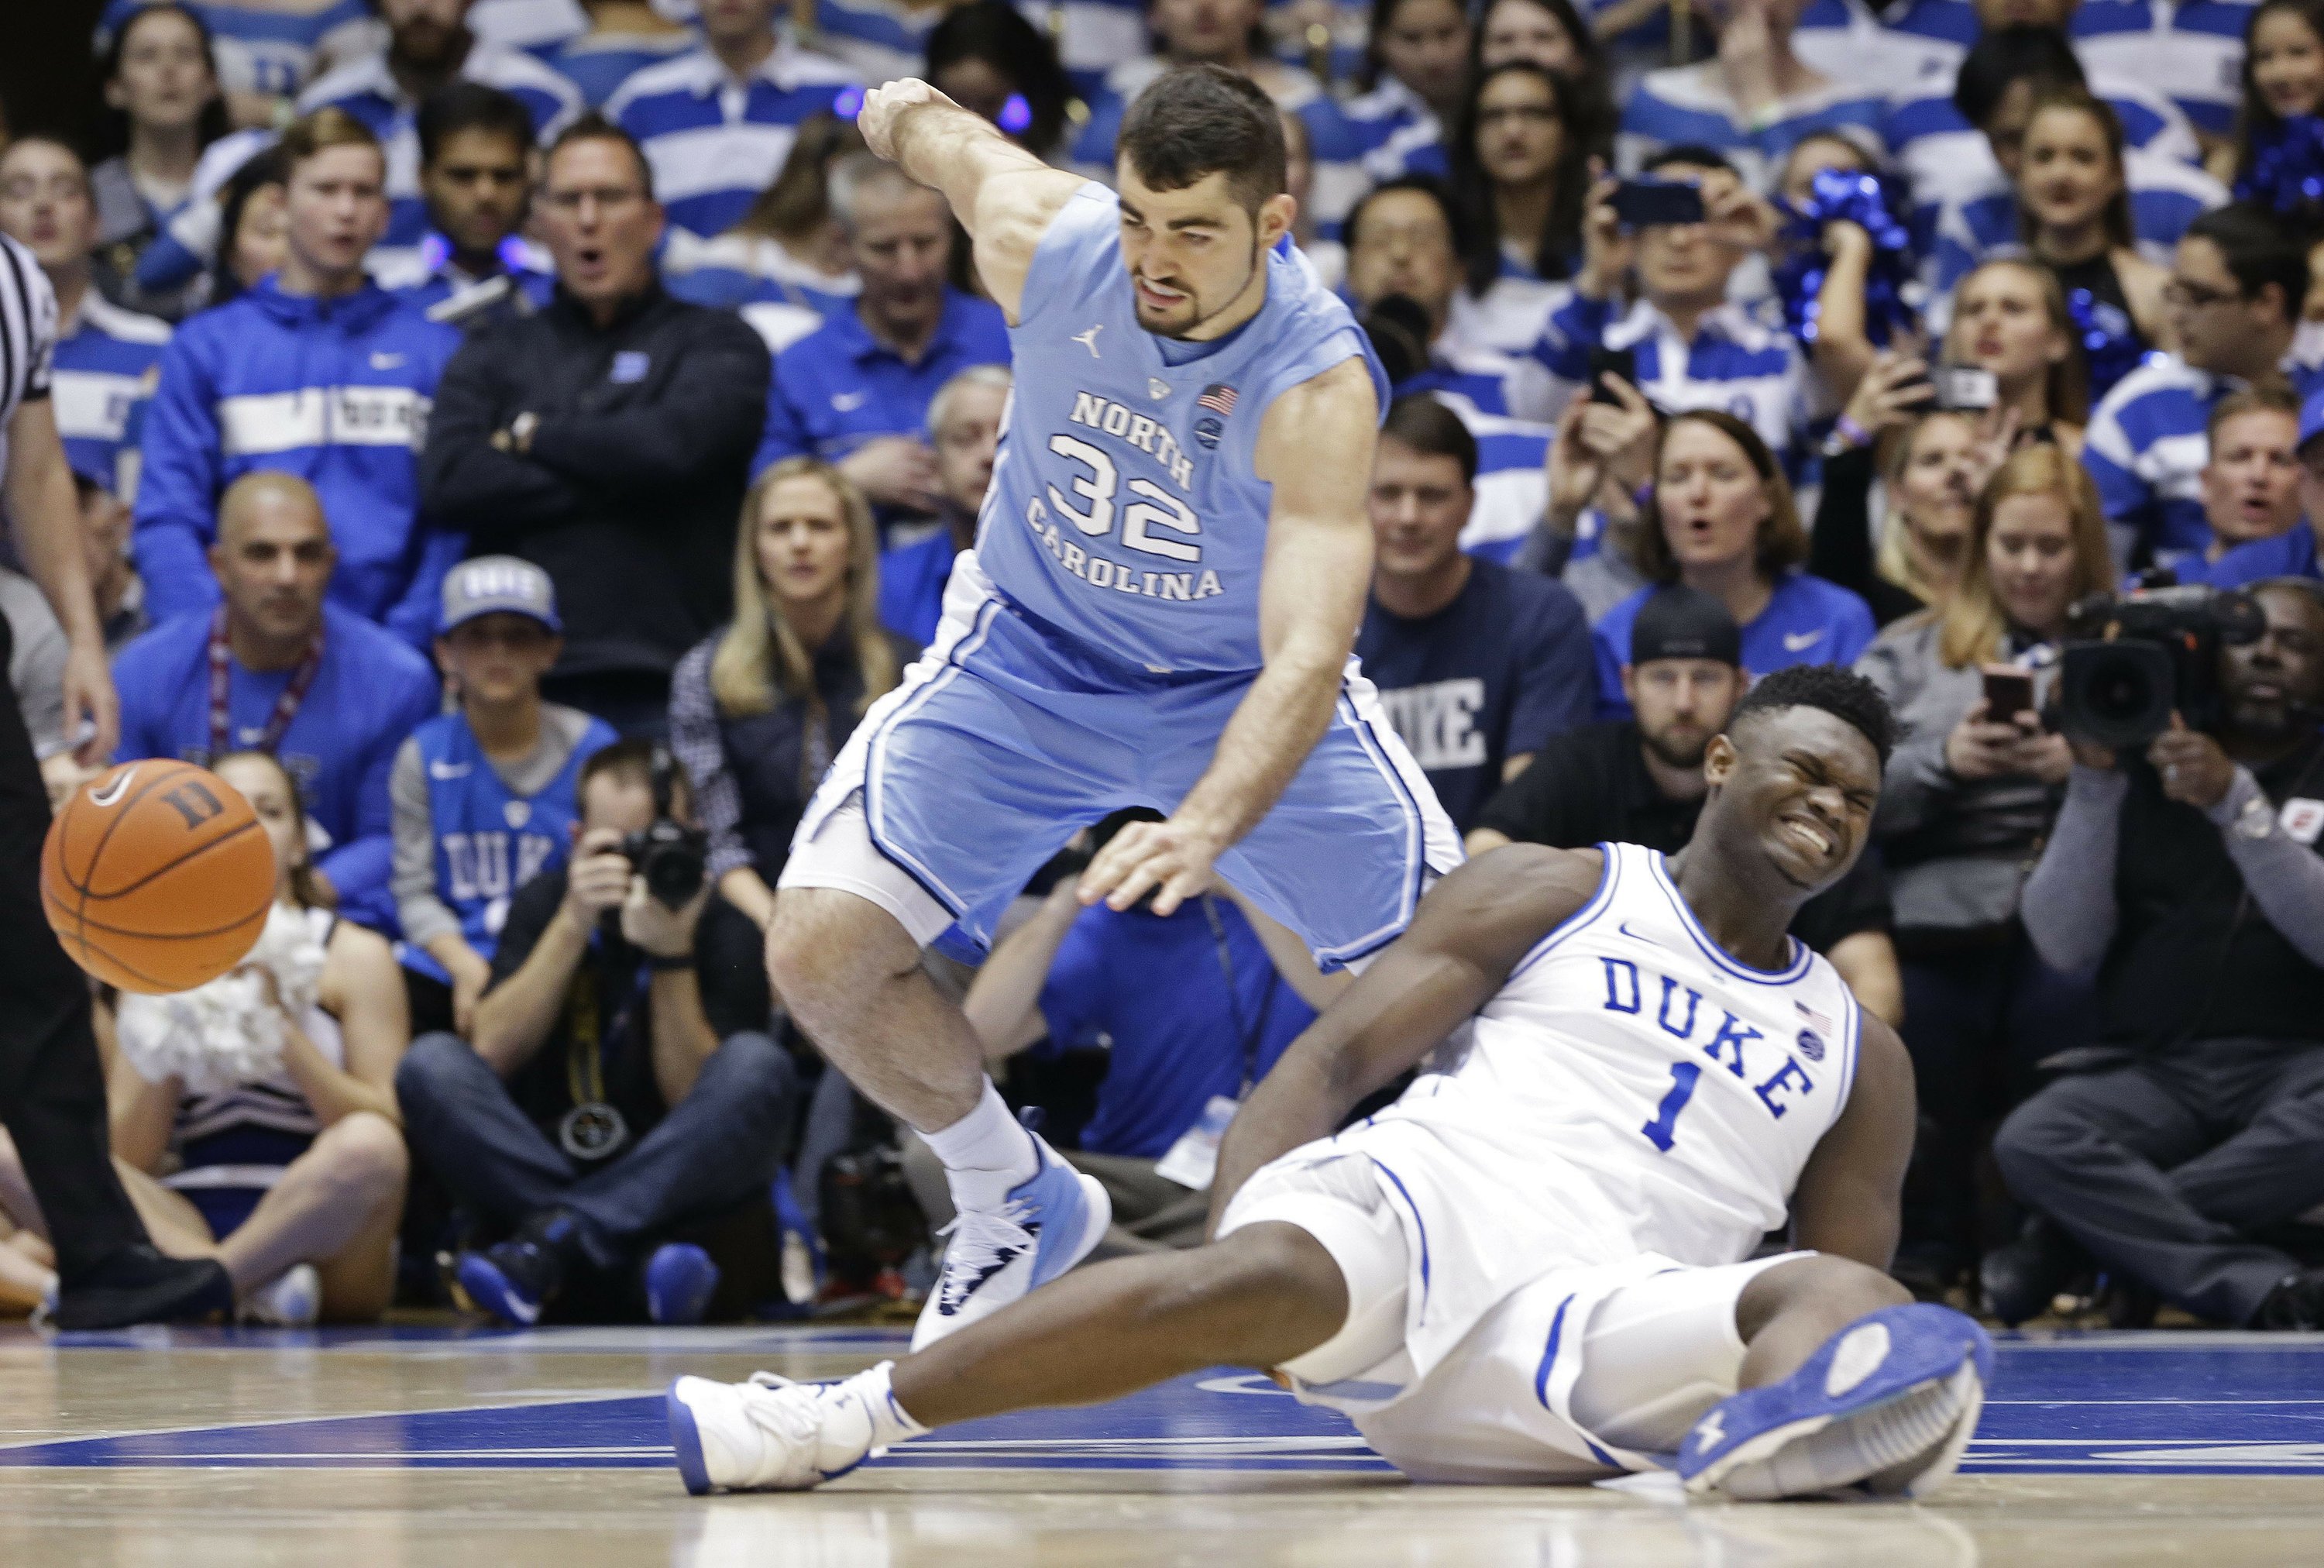 WATCH: Duke star Williamson sprains knee after Nike shoe blows out